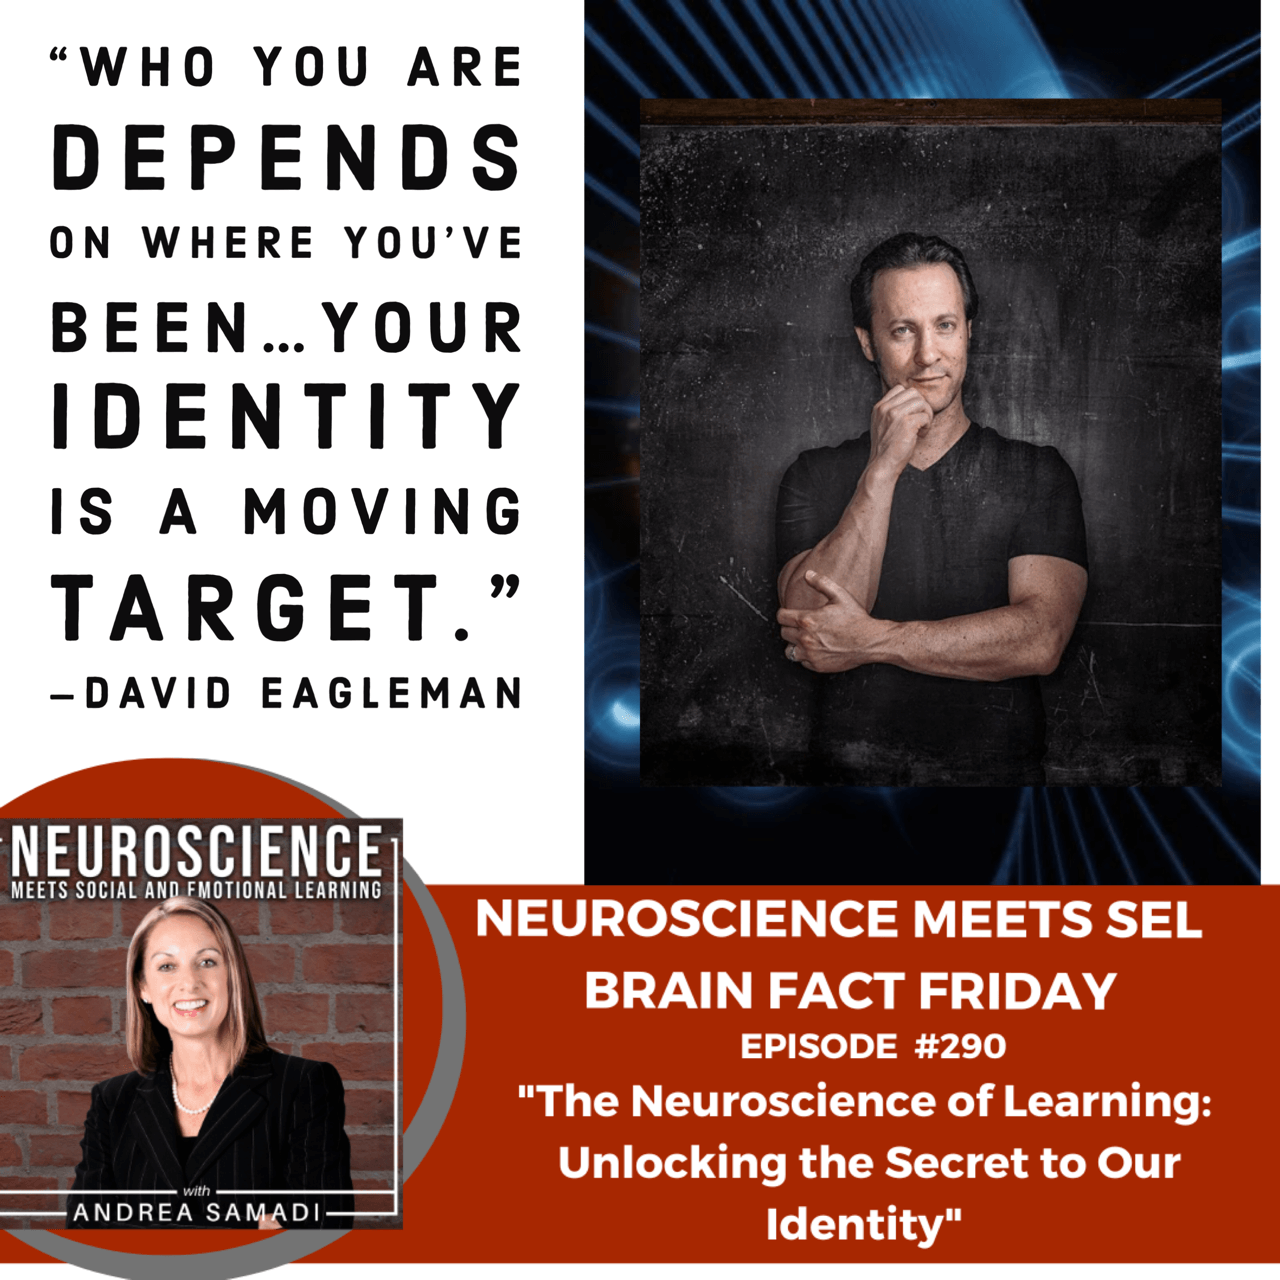 Brain Fact Friday on ”The Neuroscience of Learning: Unlocking the Secret to Our Identity”